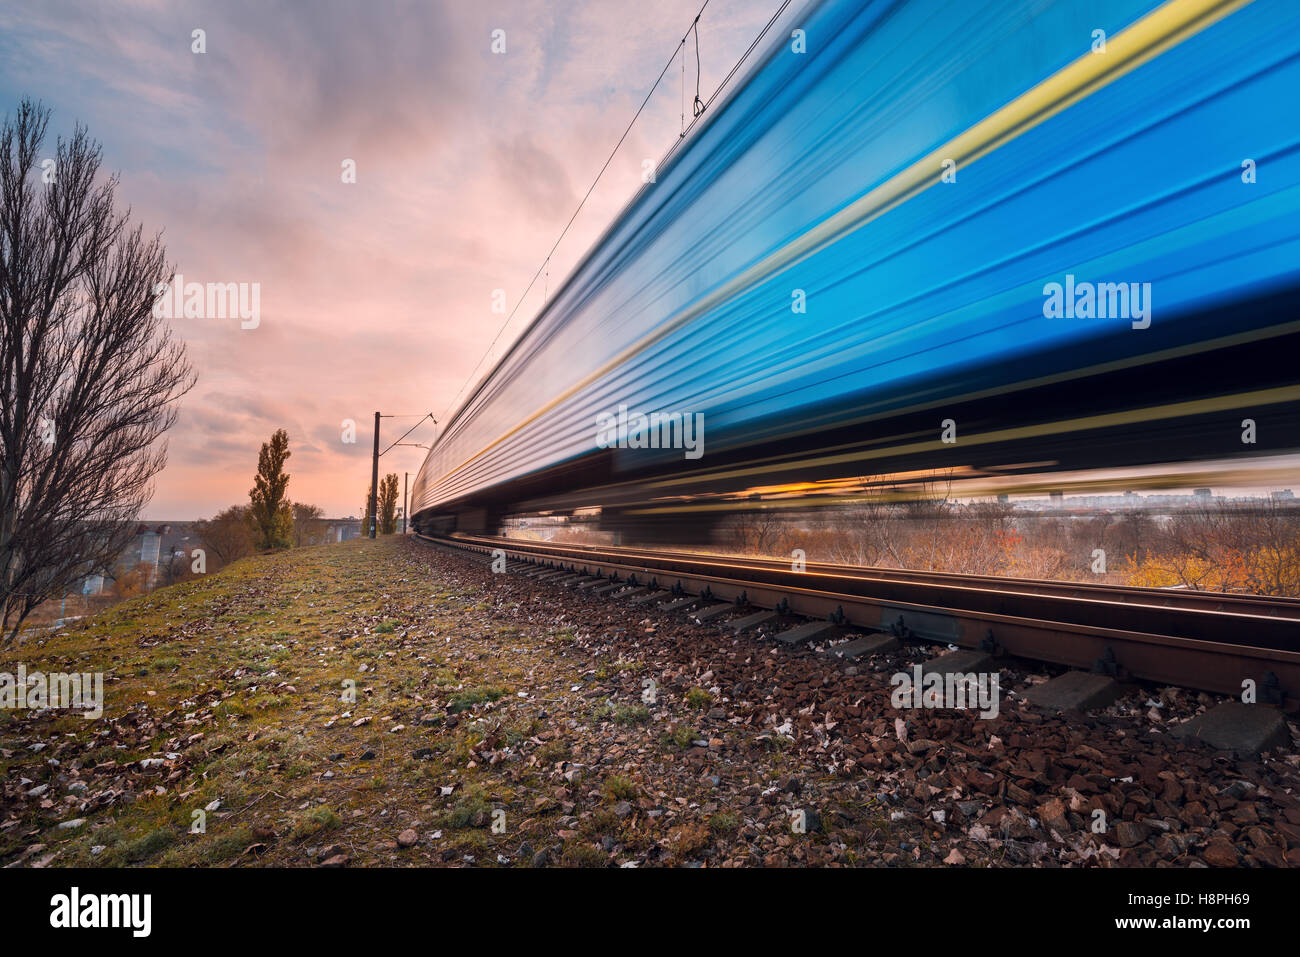 High speed blue passenger train on railroad track in motion at sunset. Blurred commuter train. Railway station with cloudy sky. Stock Photo